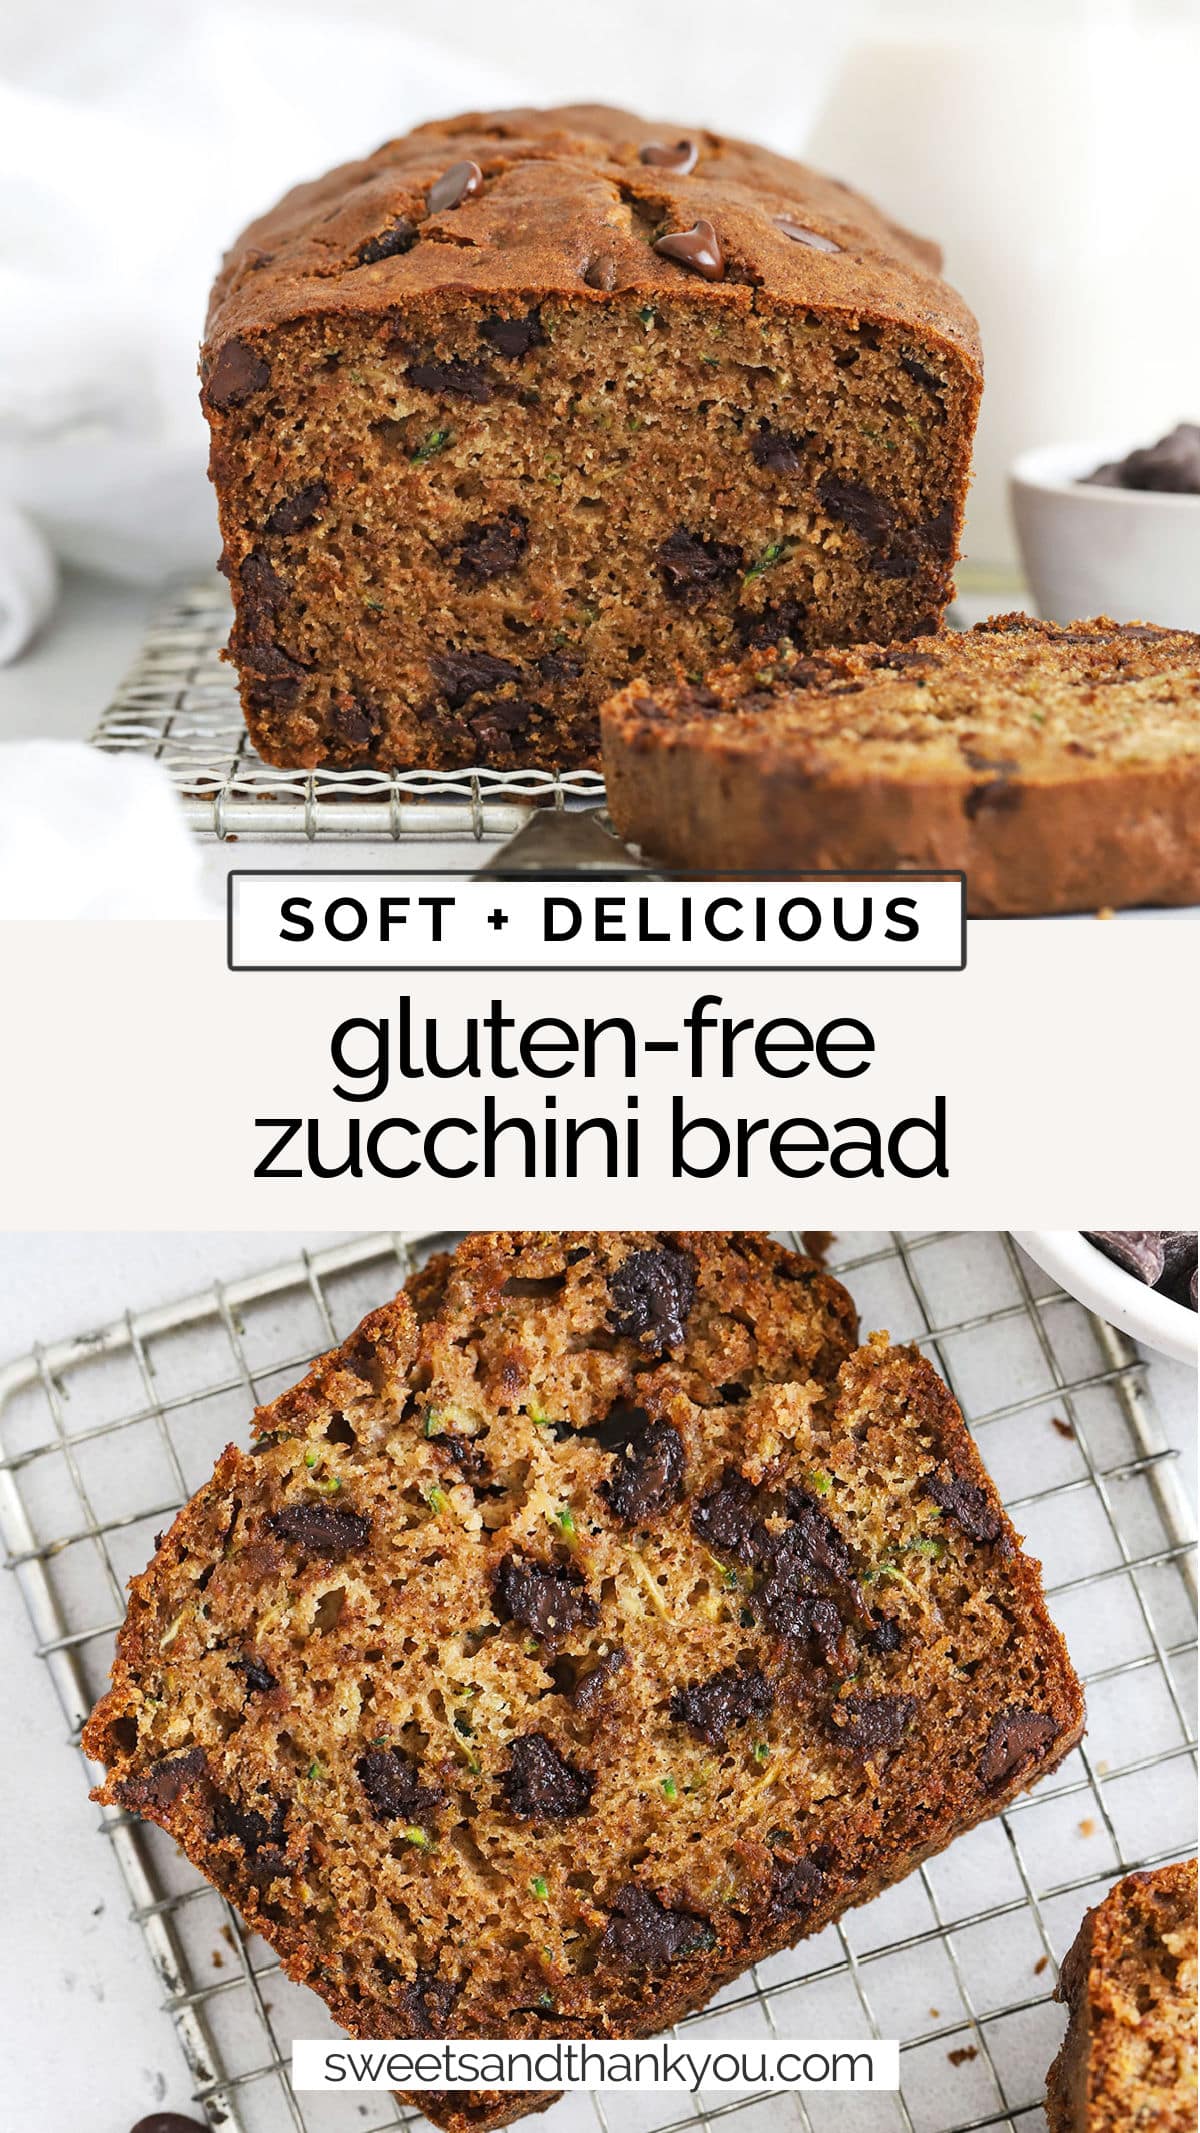 Summer is the perfect time to make this easy gluten-free zucchini bread recipe! You'll love the blend of spices, soft texture, and chocolate chips (or nuts) in every bite! / moist gluten free zucchini bread recipe / the best gluten-free zucchini bread recipe / gluten free chocolate chip zucchini bread / gluten free zucchini bread with walnuts / 